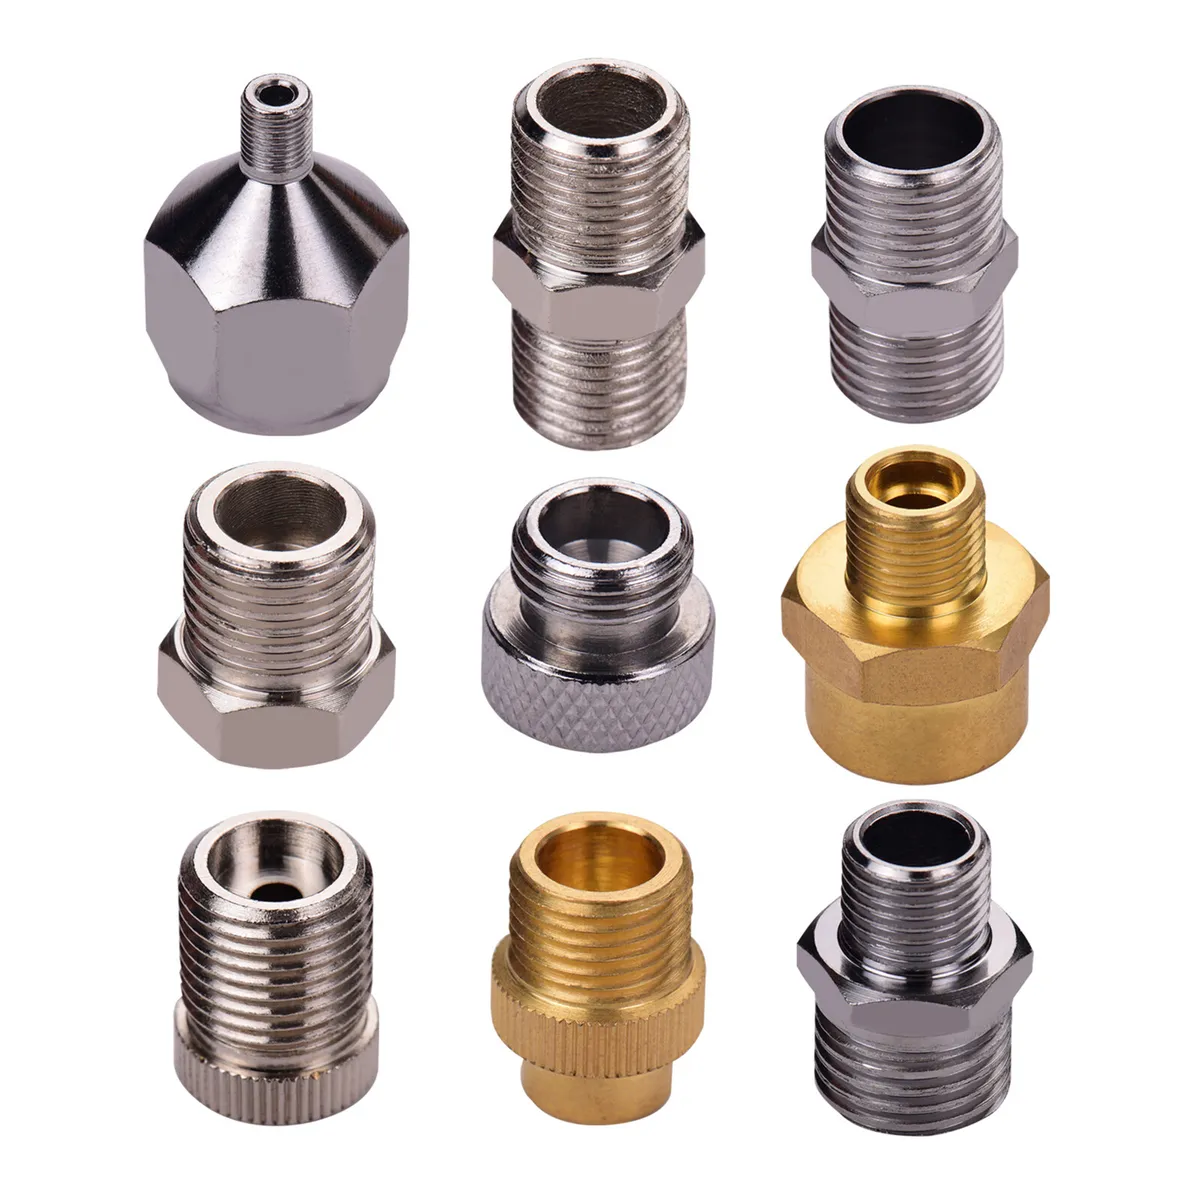 9Pcs Adaptor Kit Fitting Connector Set for Airbrush Hose with Badger Paasc  N4E6